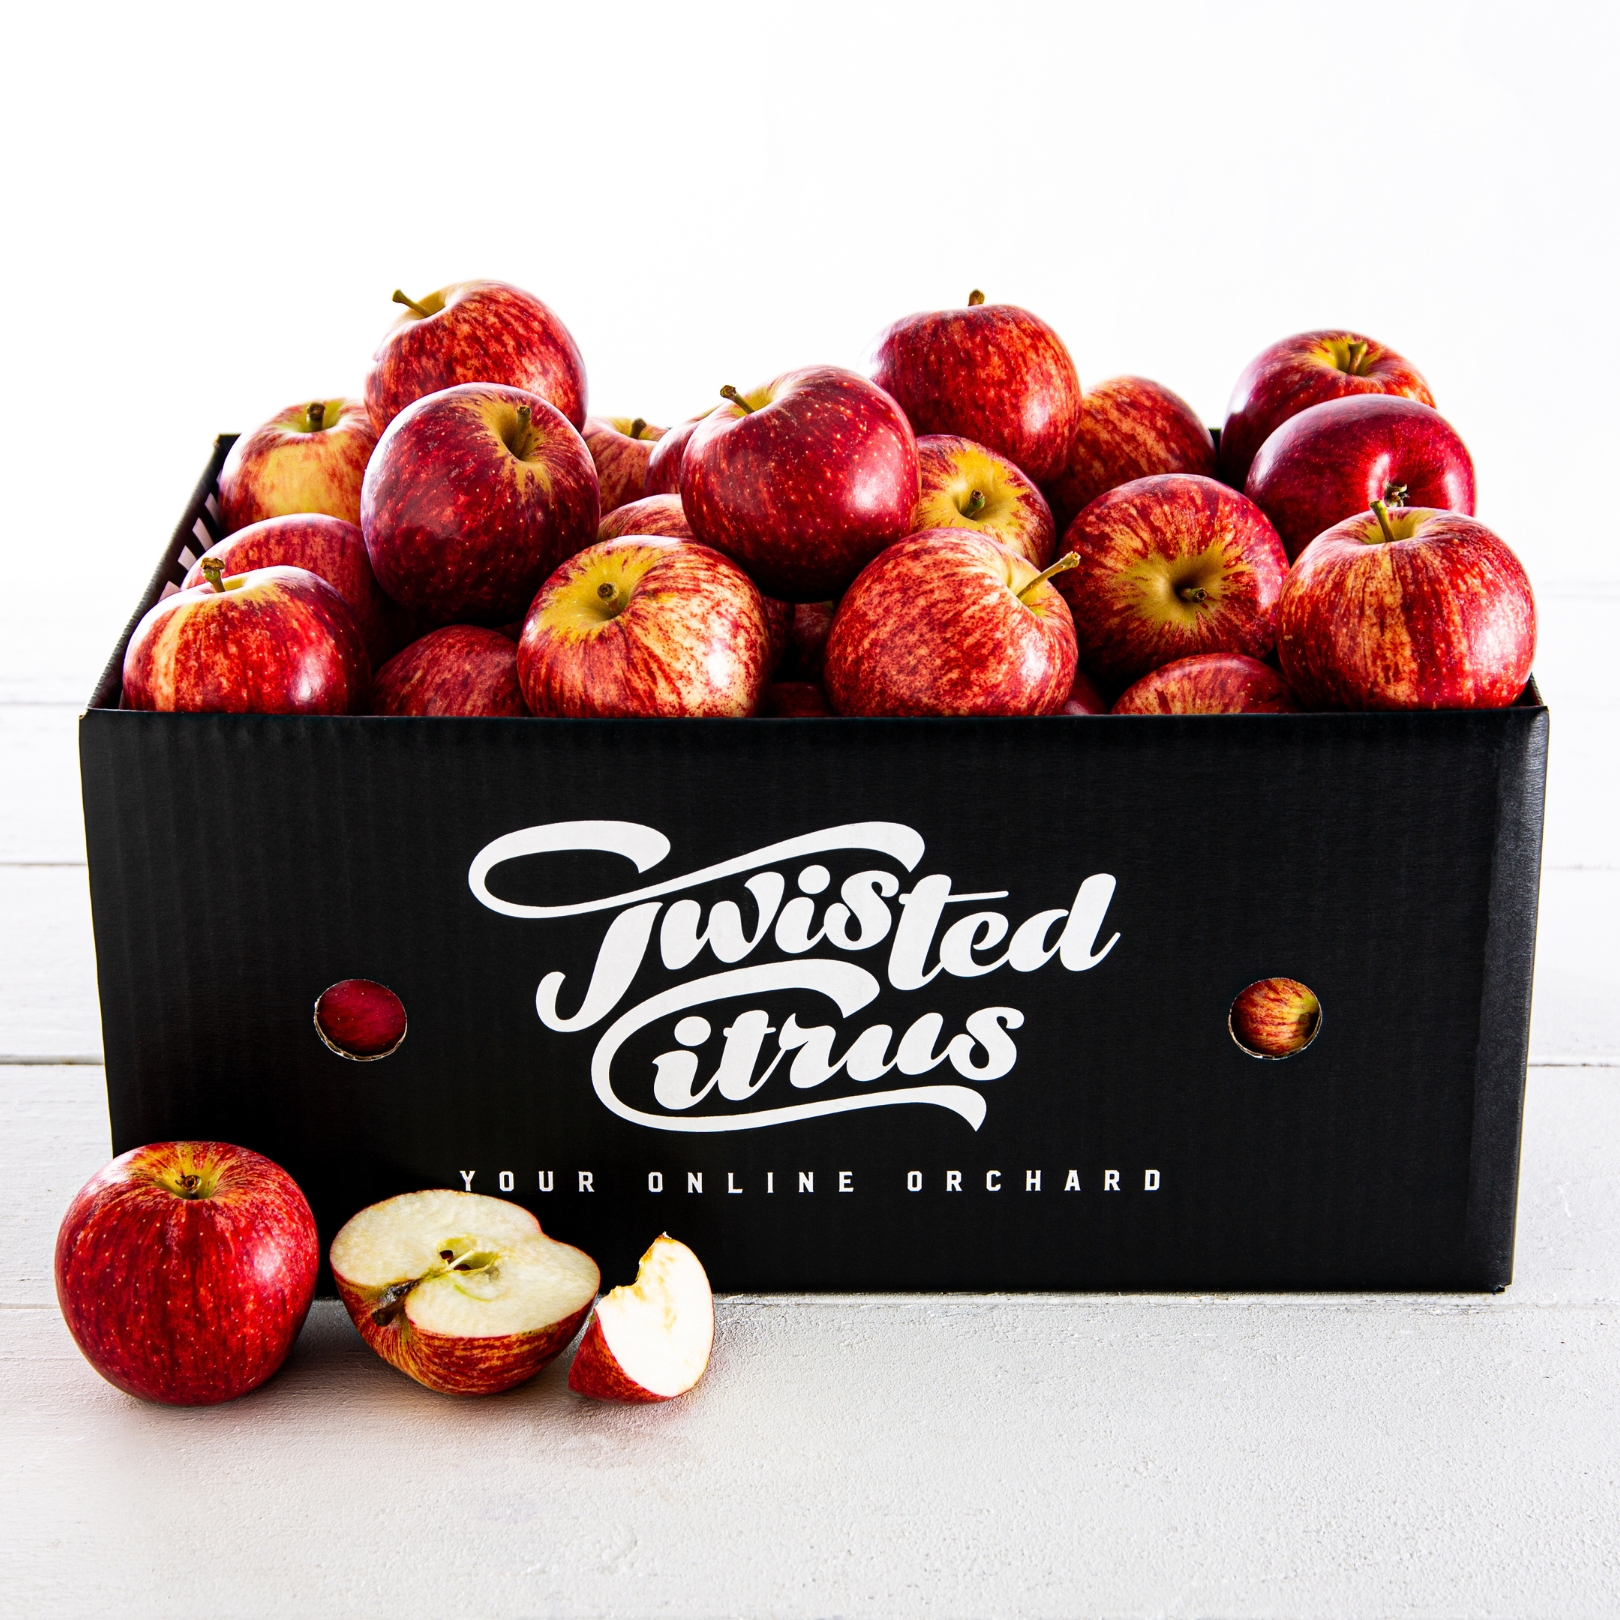 Apples - Royal Gala fruit box delivery nz